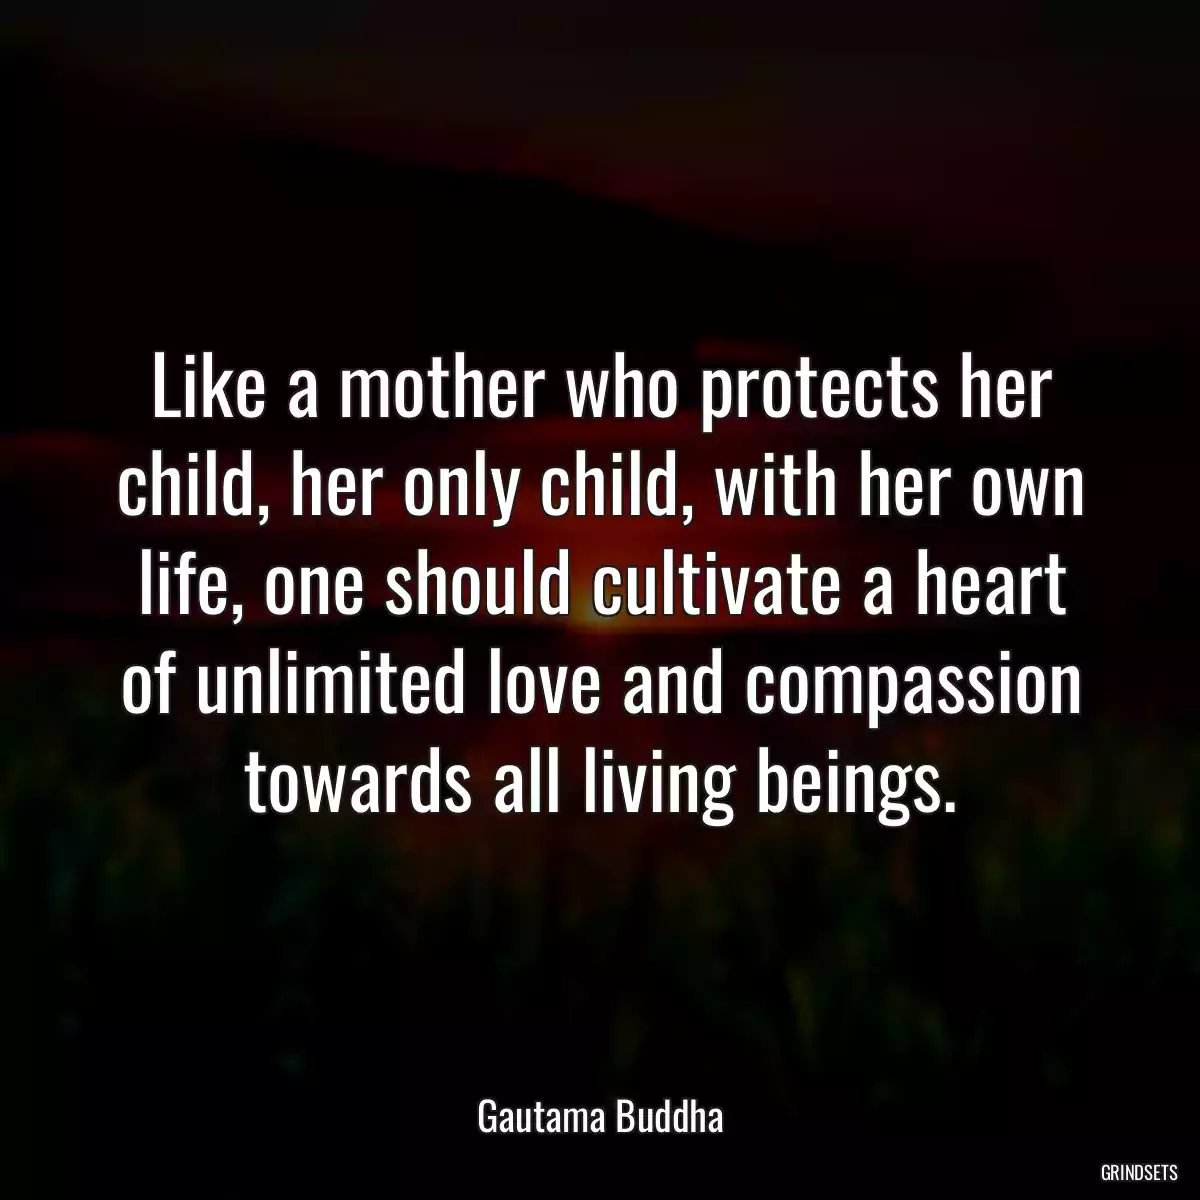 Like a mother who protects her child, her only child, with her own life, one should cultivate a heart of unlimited love and compassion towards all living beings.